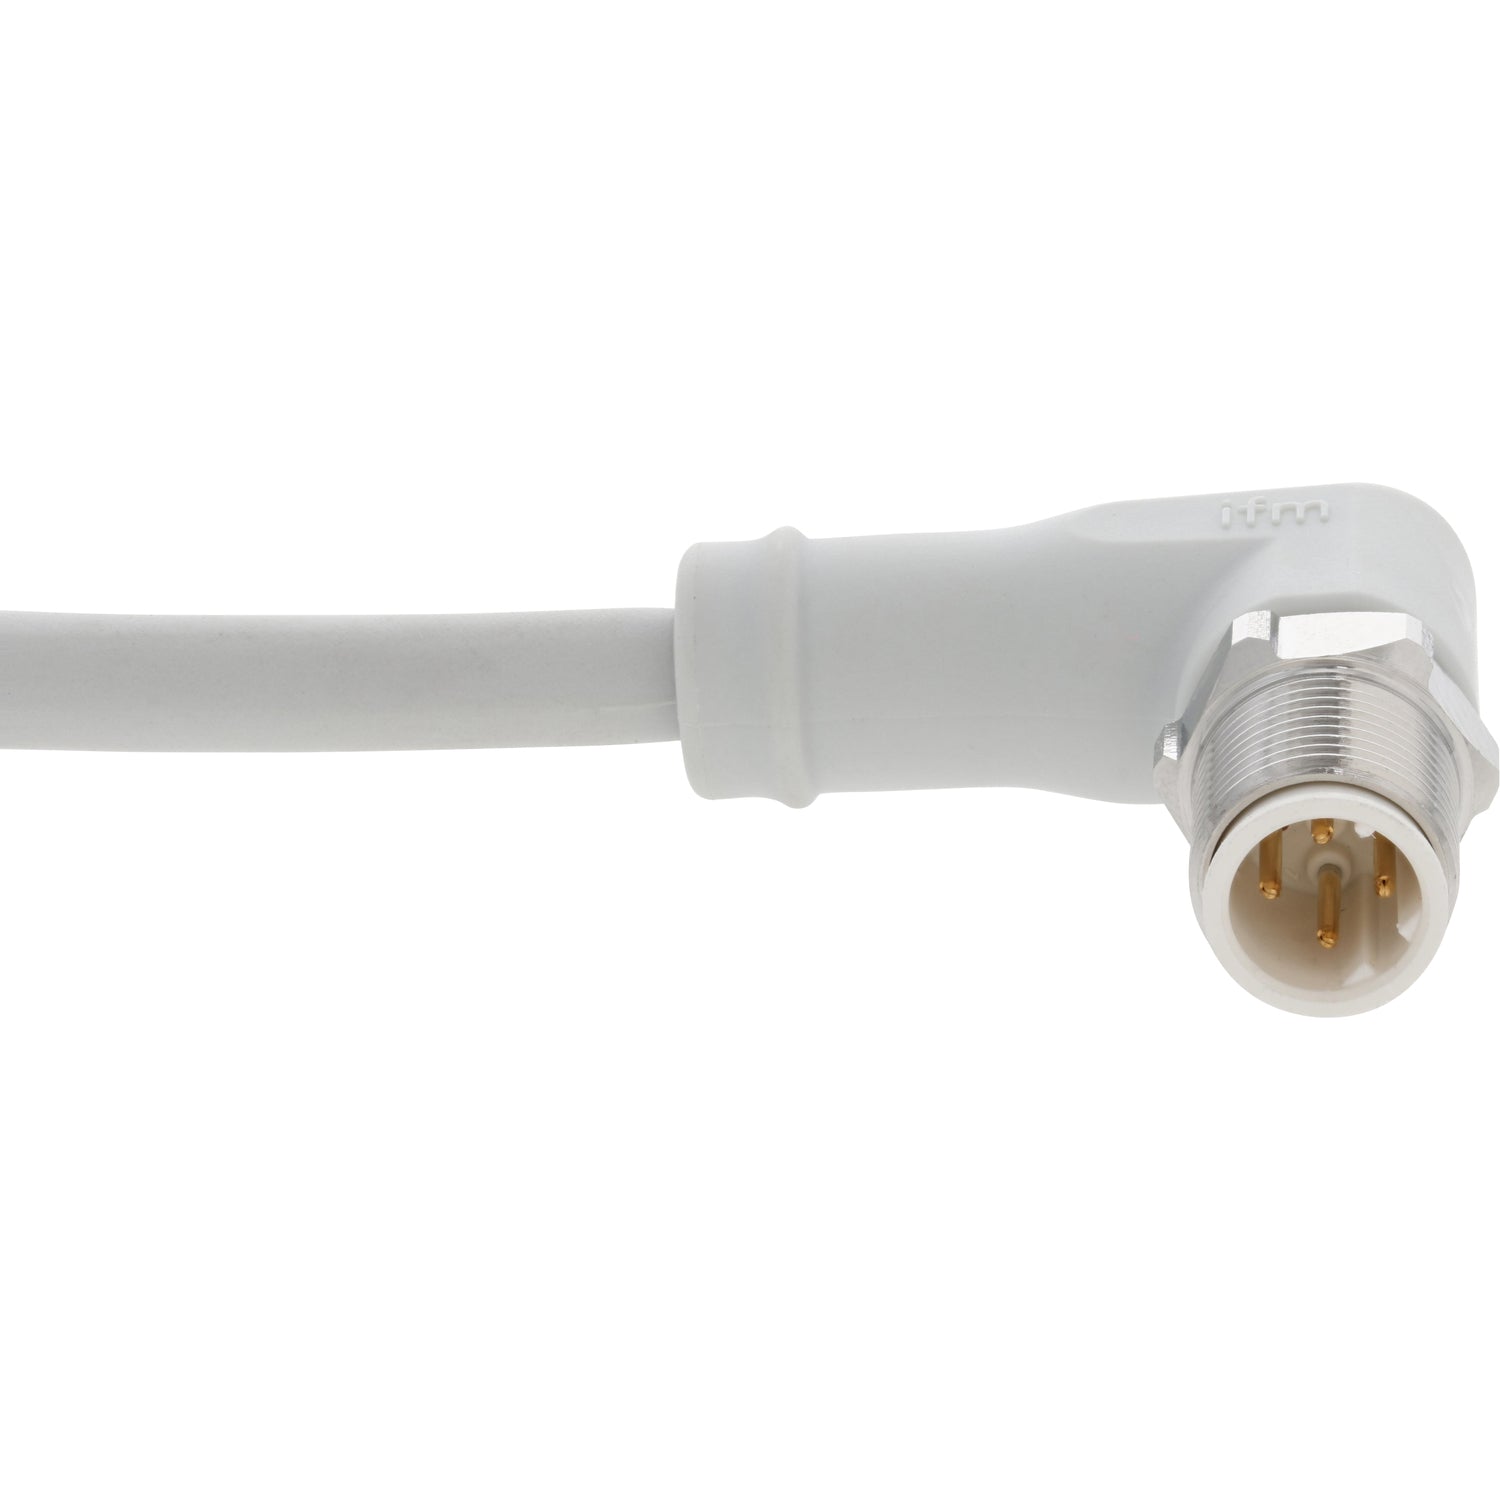 White coiled Ethernet connection cable with 90 degree molded ends on white background.